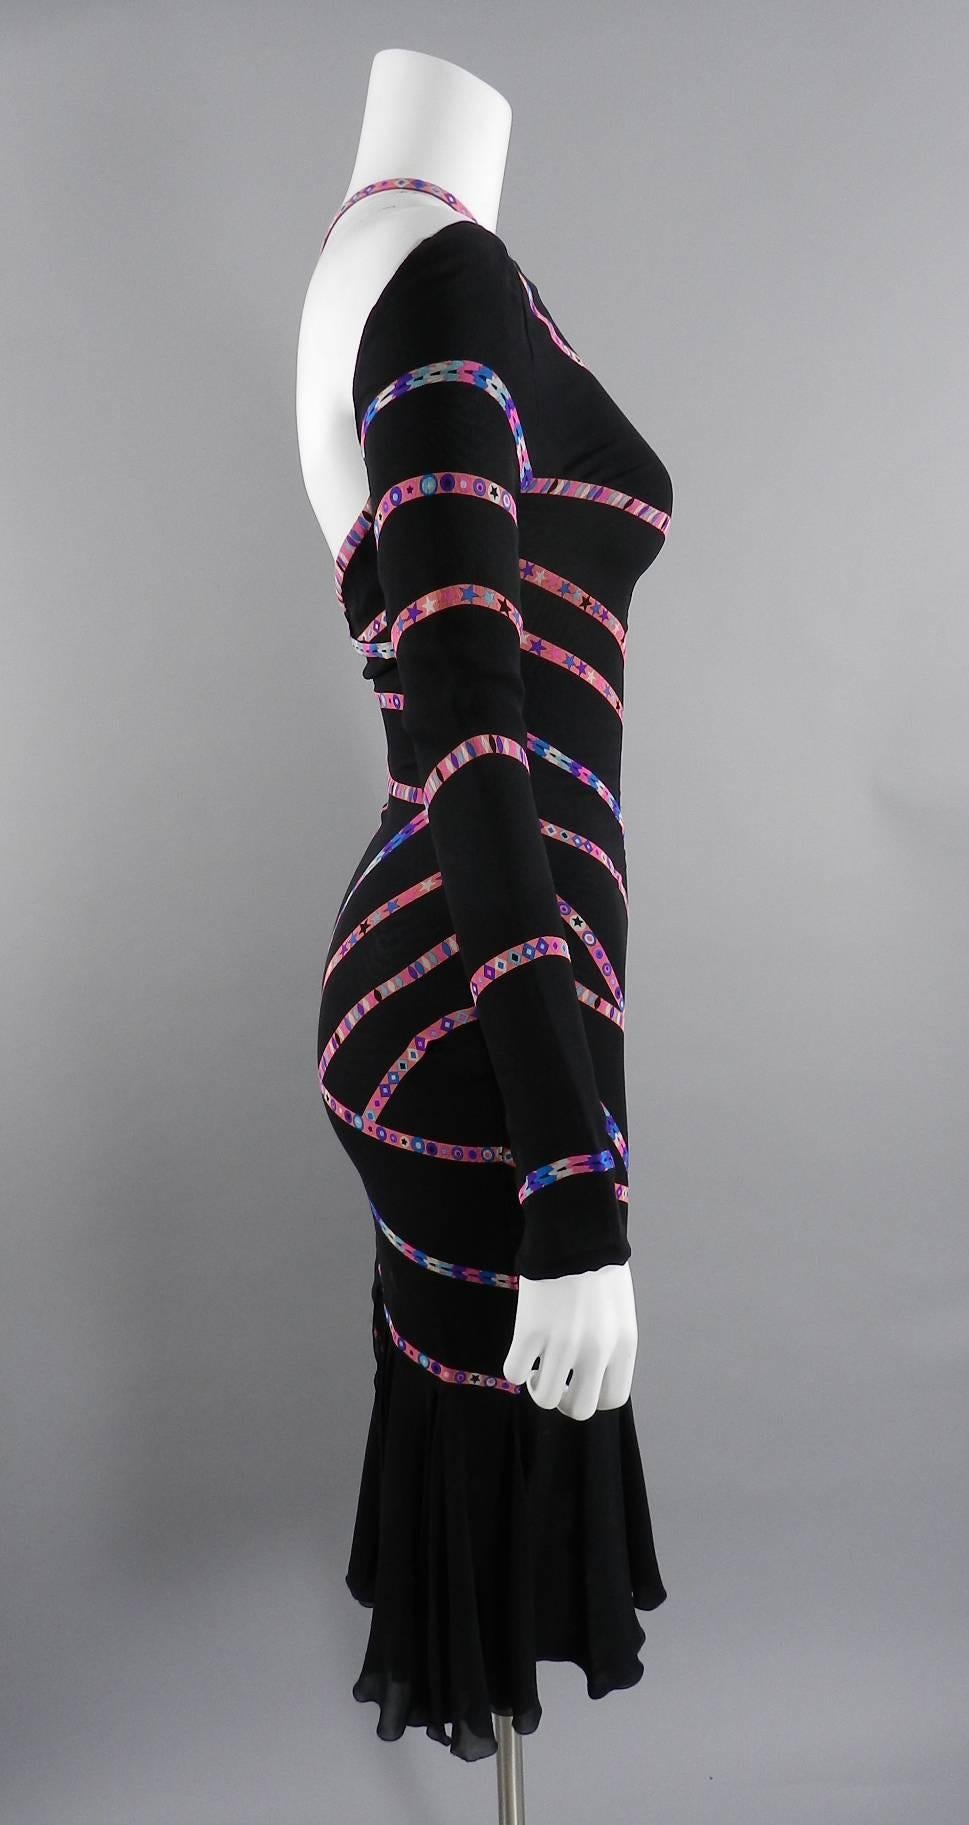 Gianni Versace Couture vintage circa 1990's black silk dress with pink and blue banded stars design. Low back, sleeves fit to front half of shoulders, invisible side zipper, ruffle silk chiffon hem. Fully lined. Excellent condition. Overall